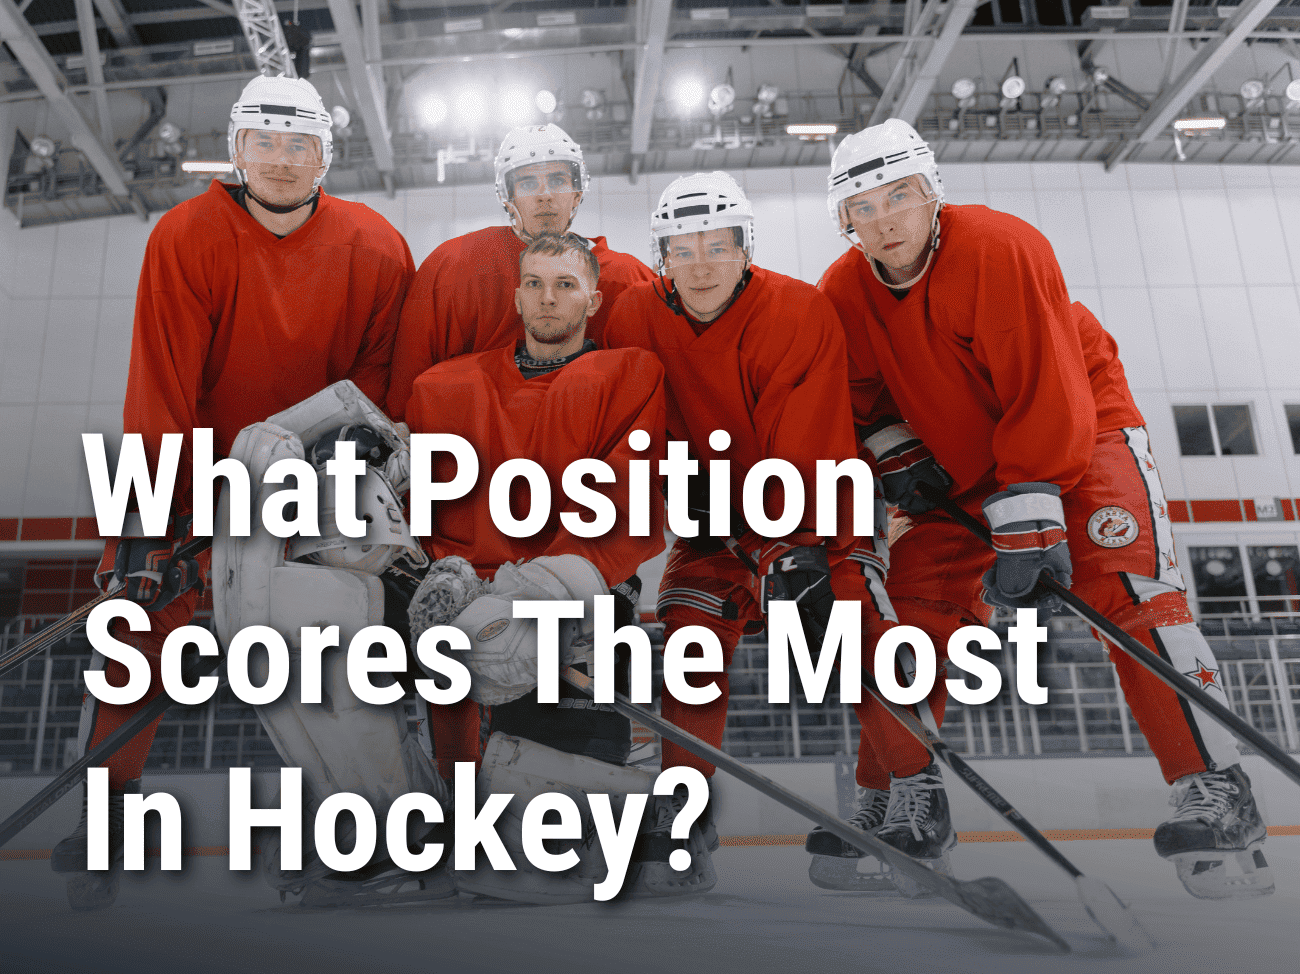 What Position Scores The Most In Hockey?